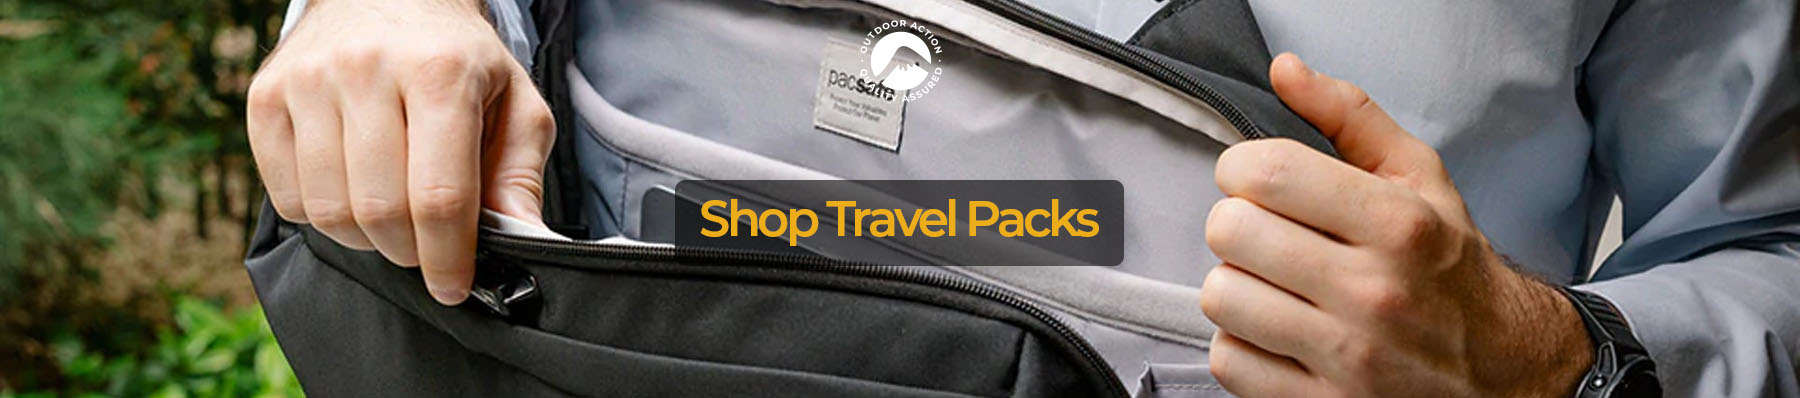 Shop Travel Packs online at Outdoor Action